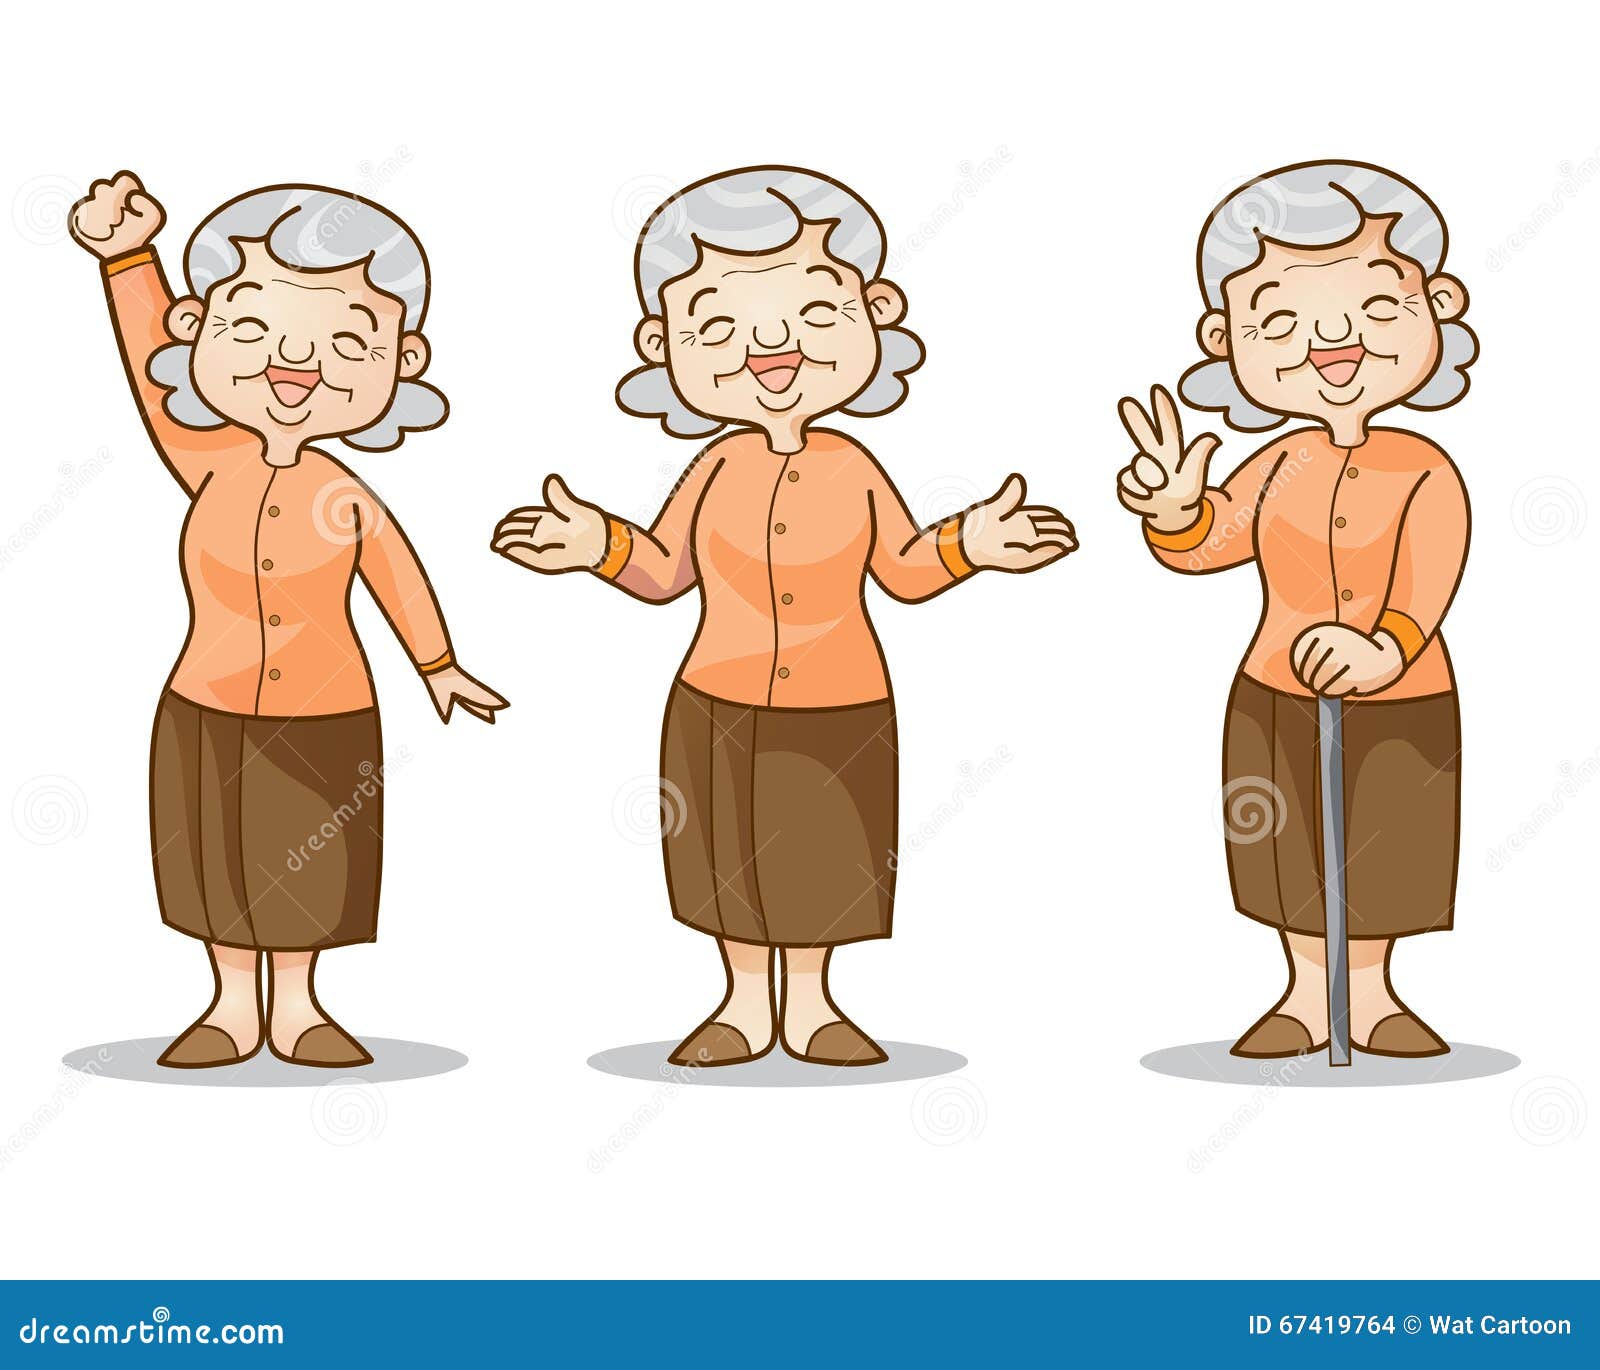 Old Woman Cartoon Character Set Stock Vector - Illustration of character,  design: 67419764